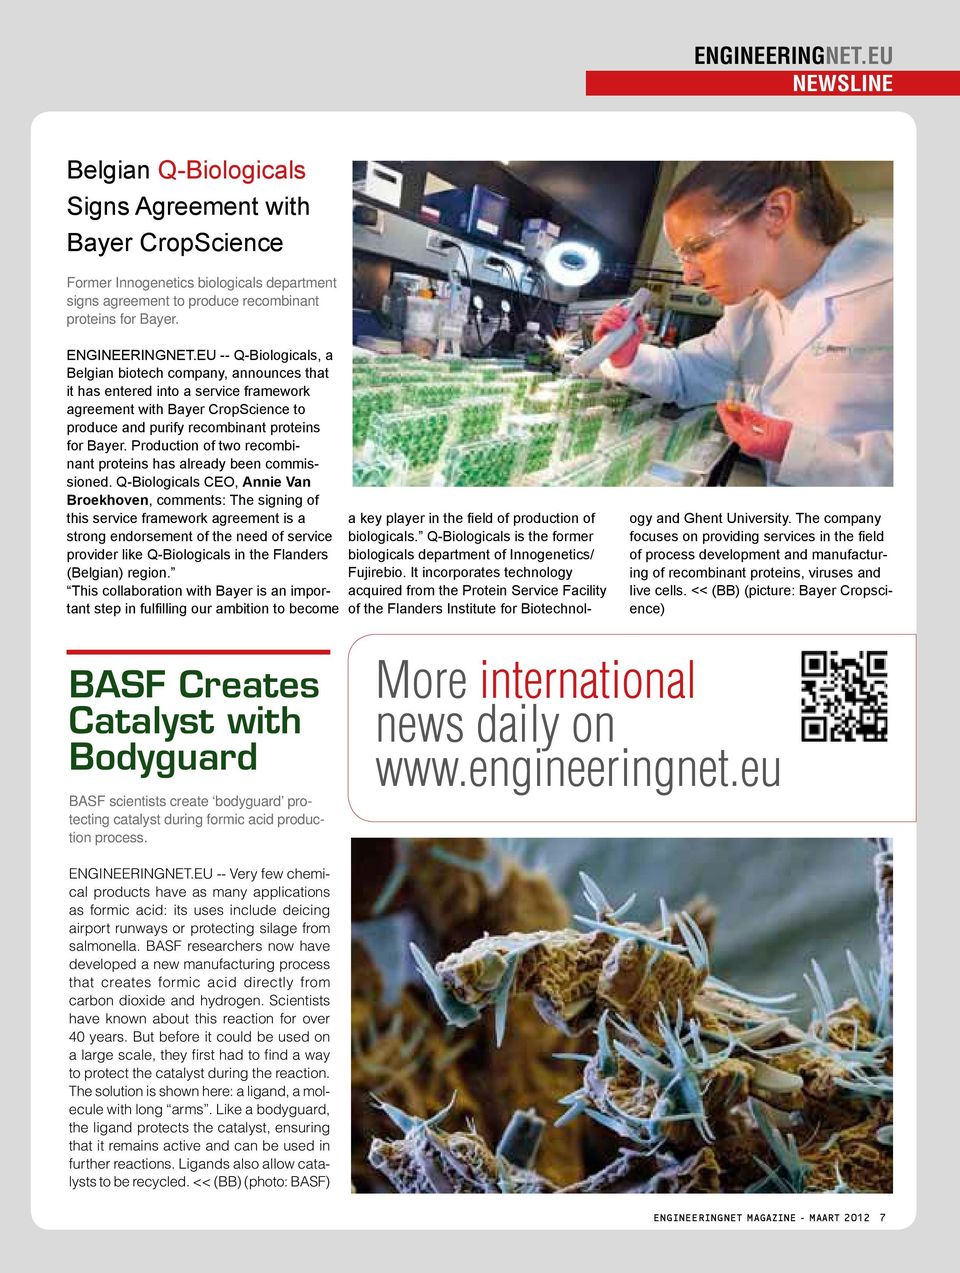 EU -- Q-Biologicals, a Belgian biotech company, announces that it has entered into a service framework agreement with Bayer CropScience to produce and purify recombinant proteins for Bayer.